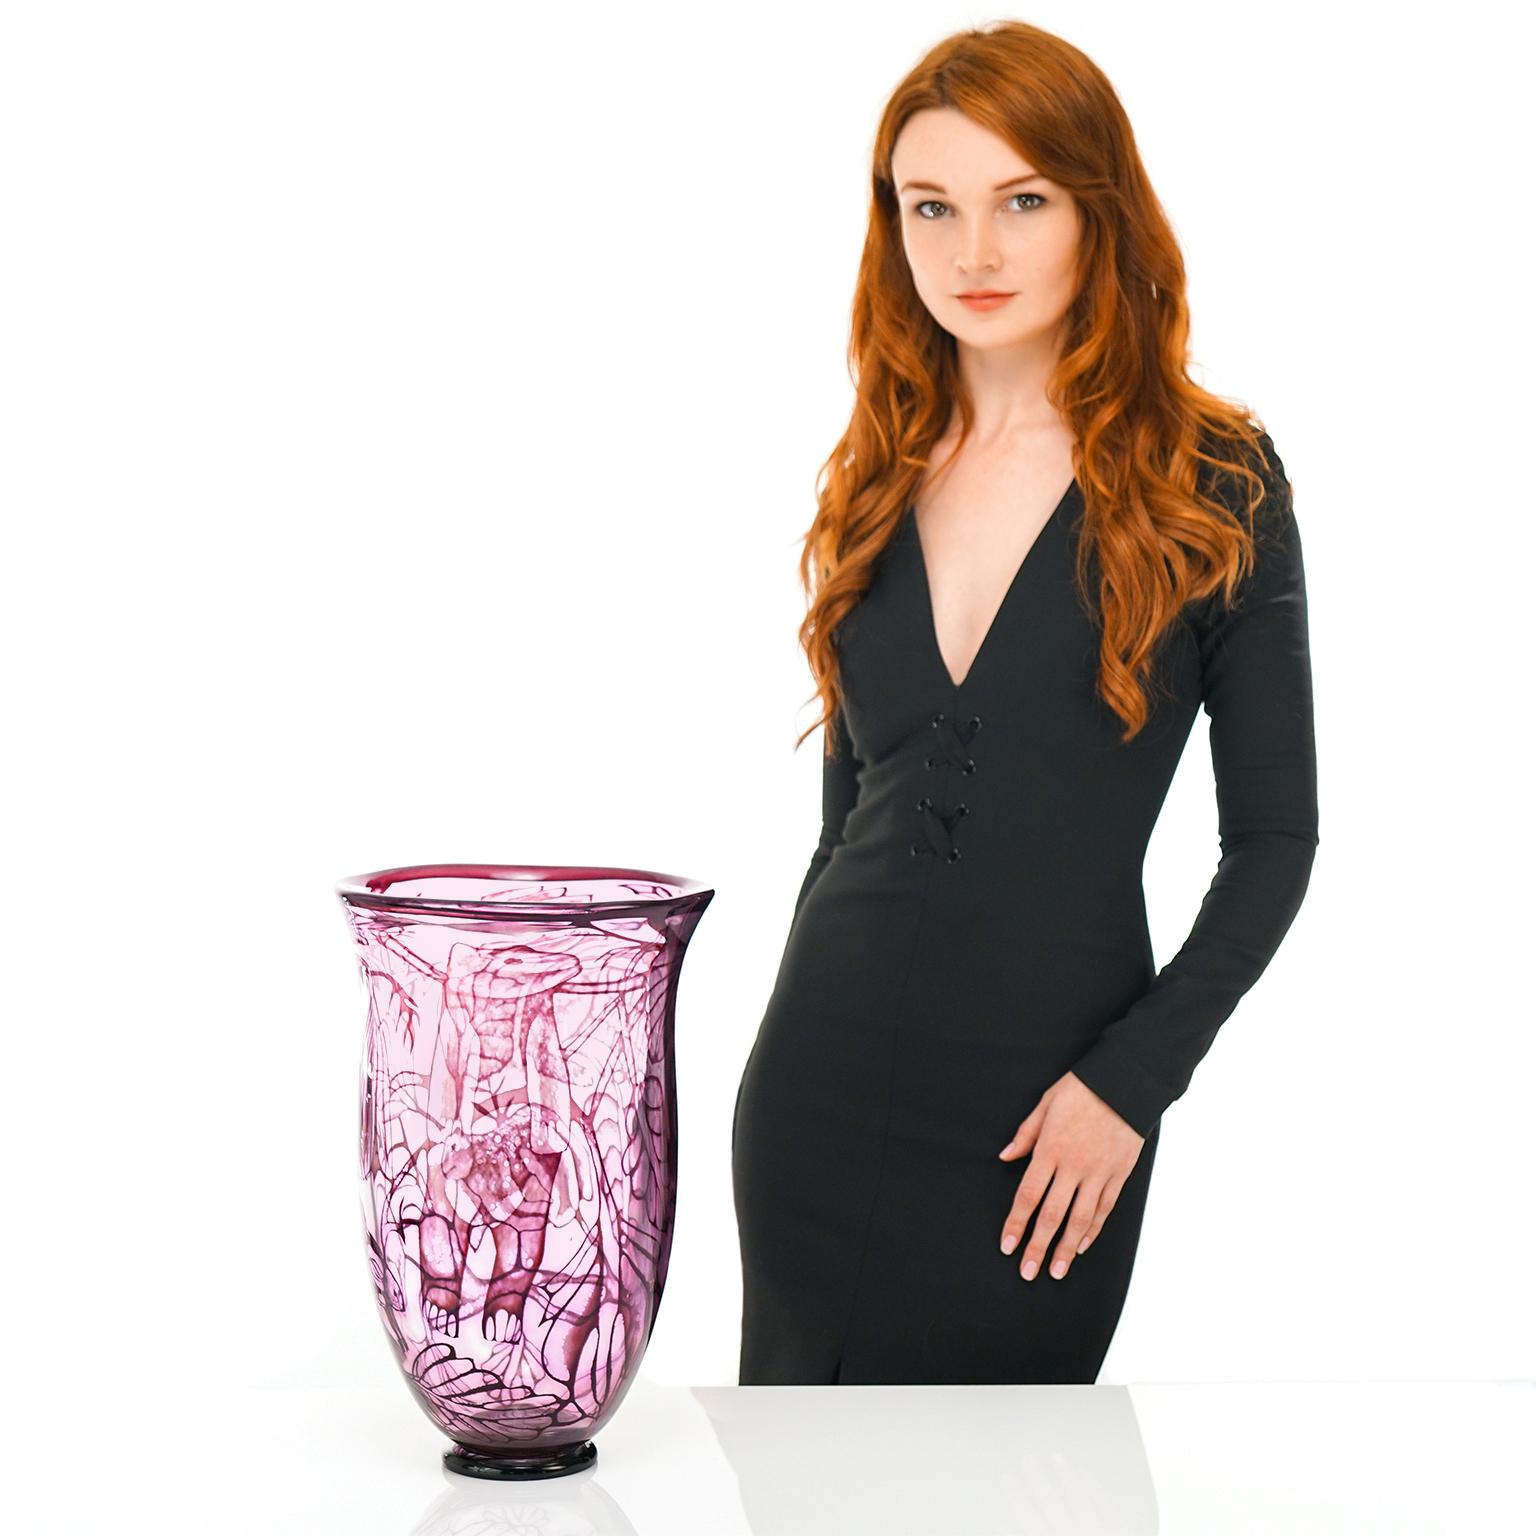 By Eva Englund for Orrefors, Sweden, circa 1976. This spectacular 15 inch tall vase by the renowned glass designer, Eva Englund for Orrefors, features a whimsical woodland motif in delicate pink, lavender and purple hues. Fabricated using the